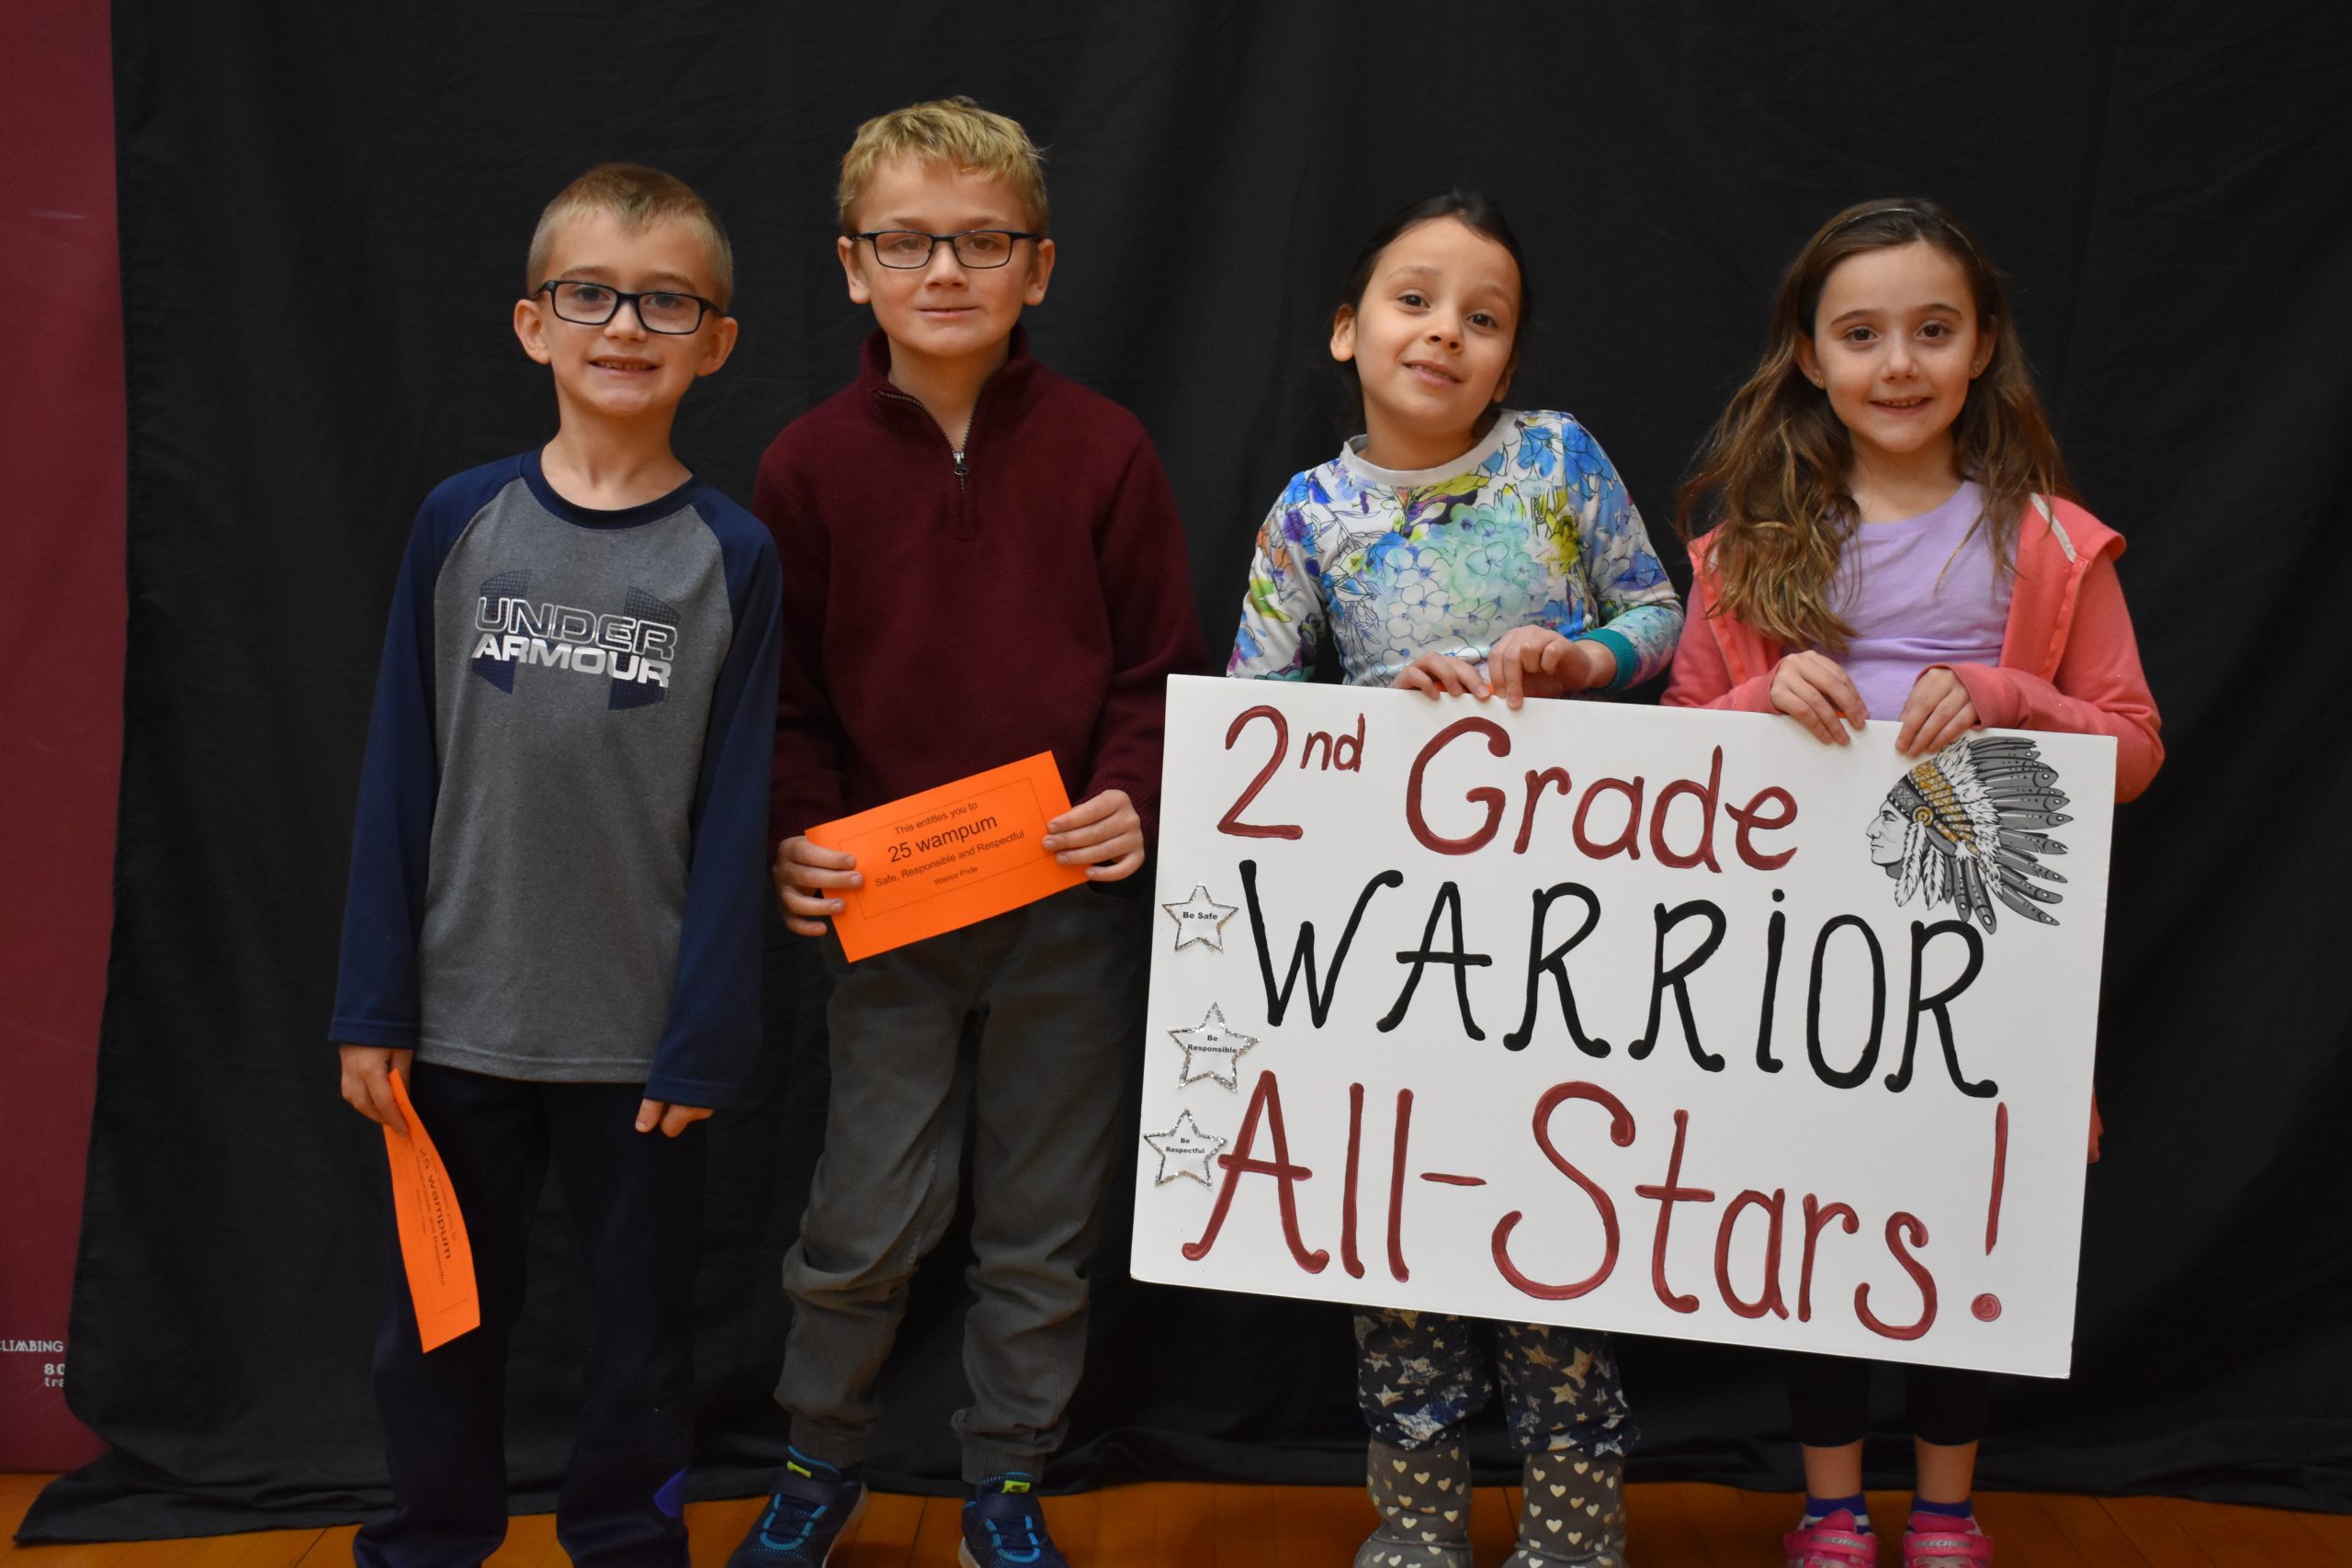 Students lined up with the second grade warrior sign